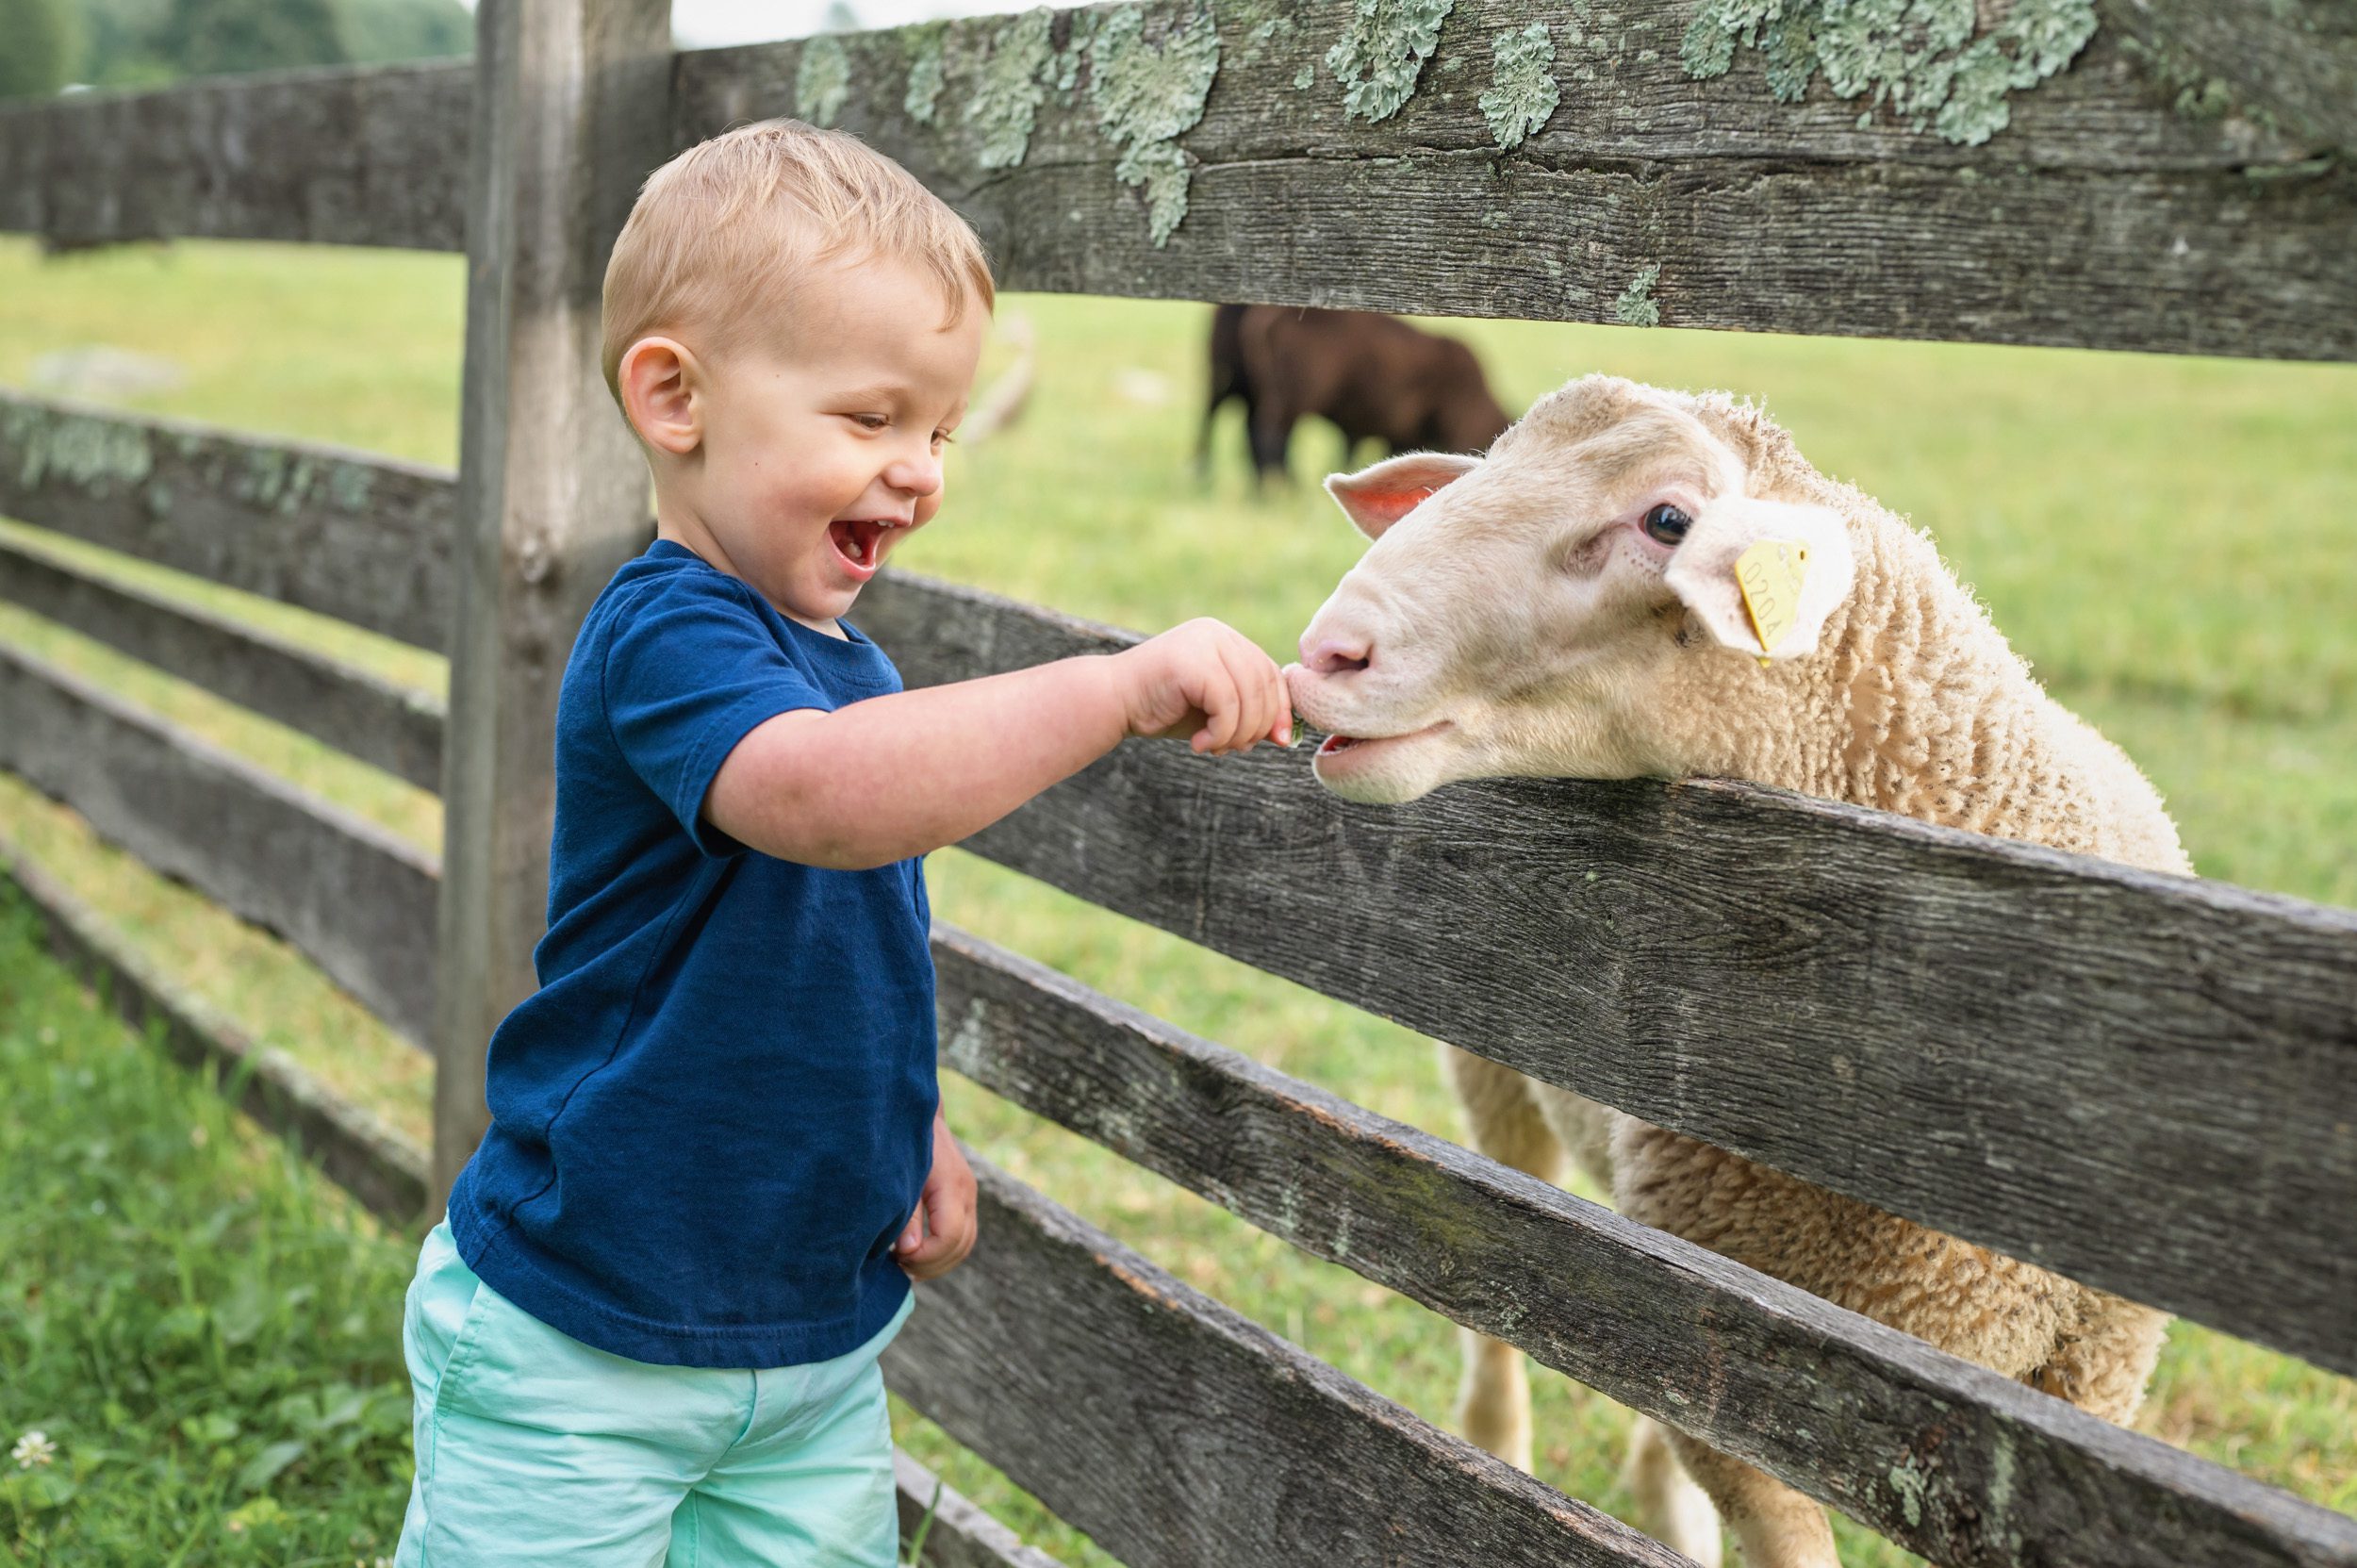 A young boy smiling as he feeds a sheep grass through a fence during a family photoshoot